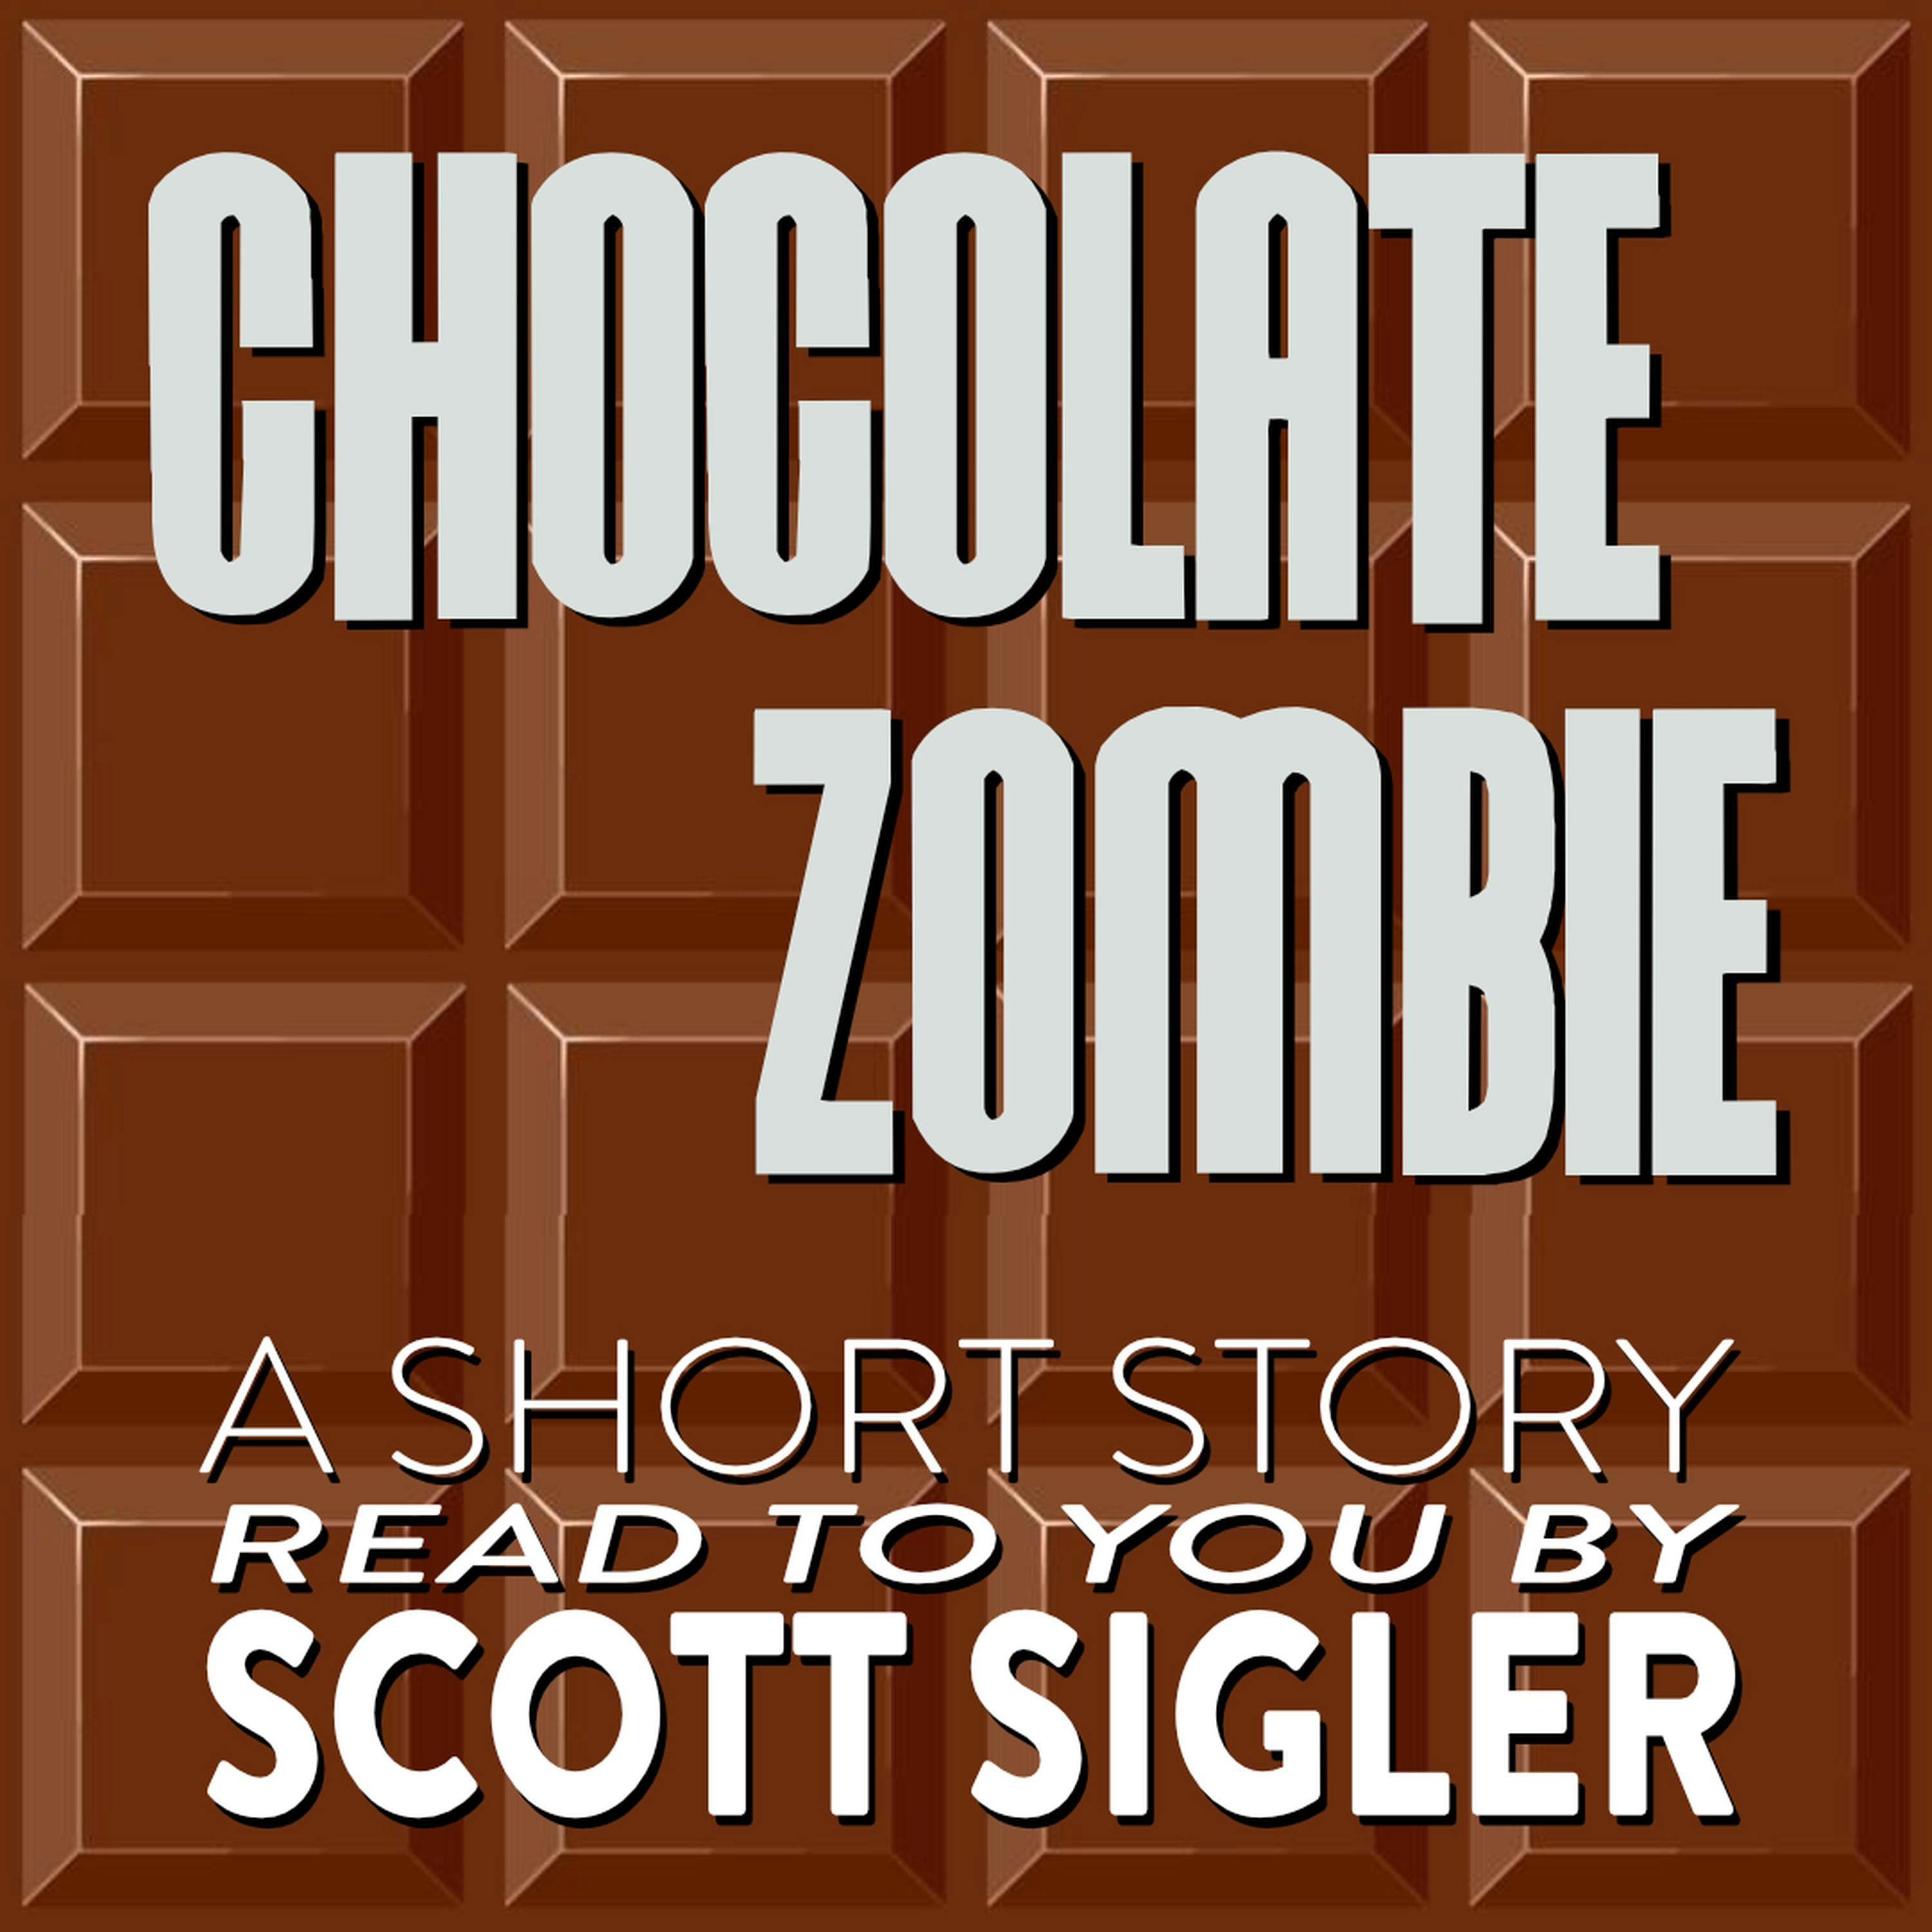 Chocolate Zombie, a short story